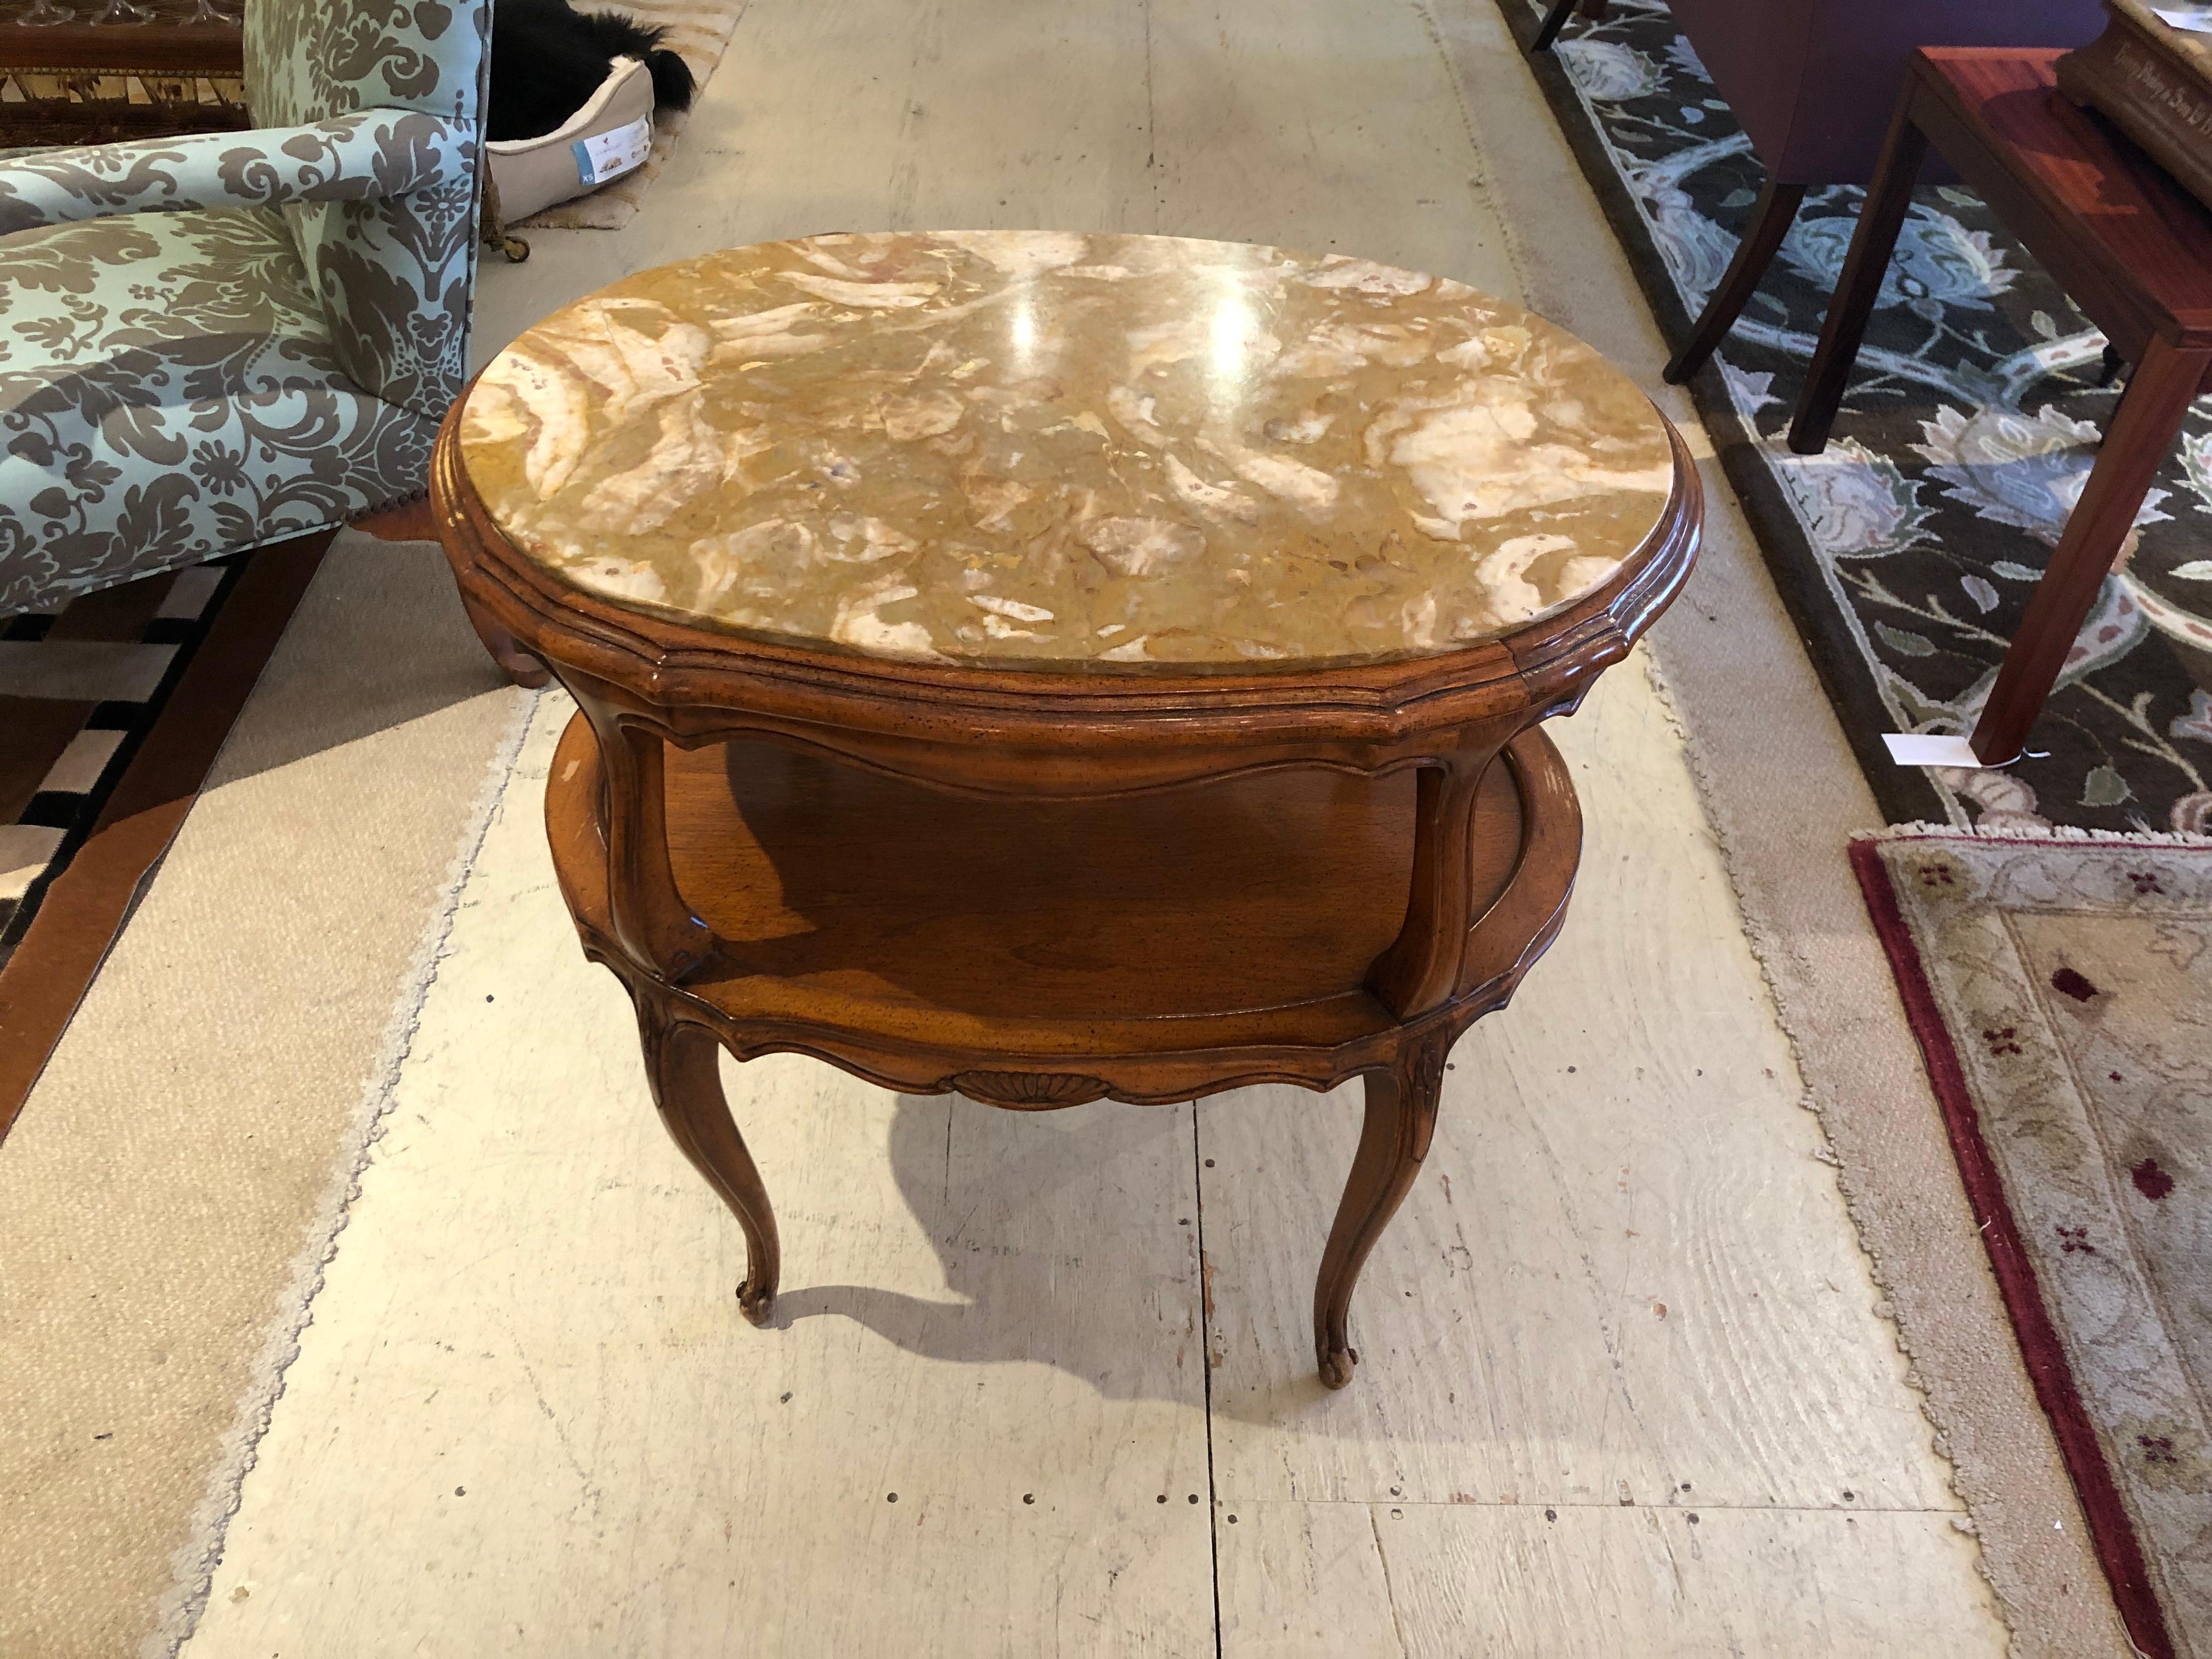 French Provincial style marble inset two-tiered oval side table having handsome carved wood with cabriole legs and scalloped apron beneath the bottom tier. Marble is a luscious caramel and cream. Makes a great stationary bar. 2nd tier 17 H from